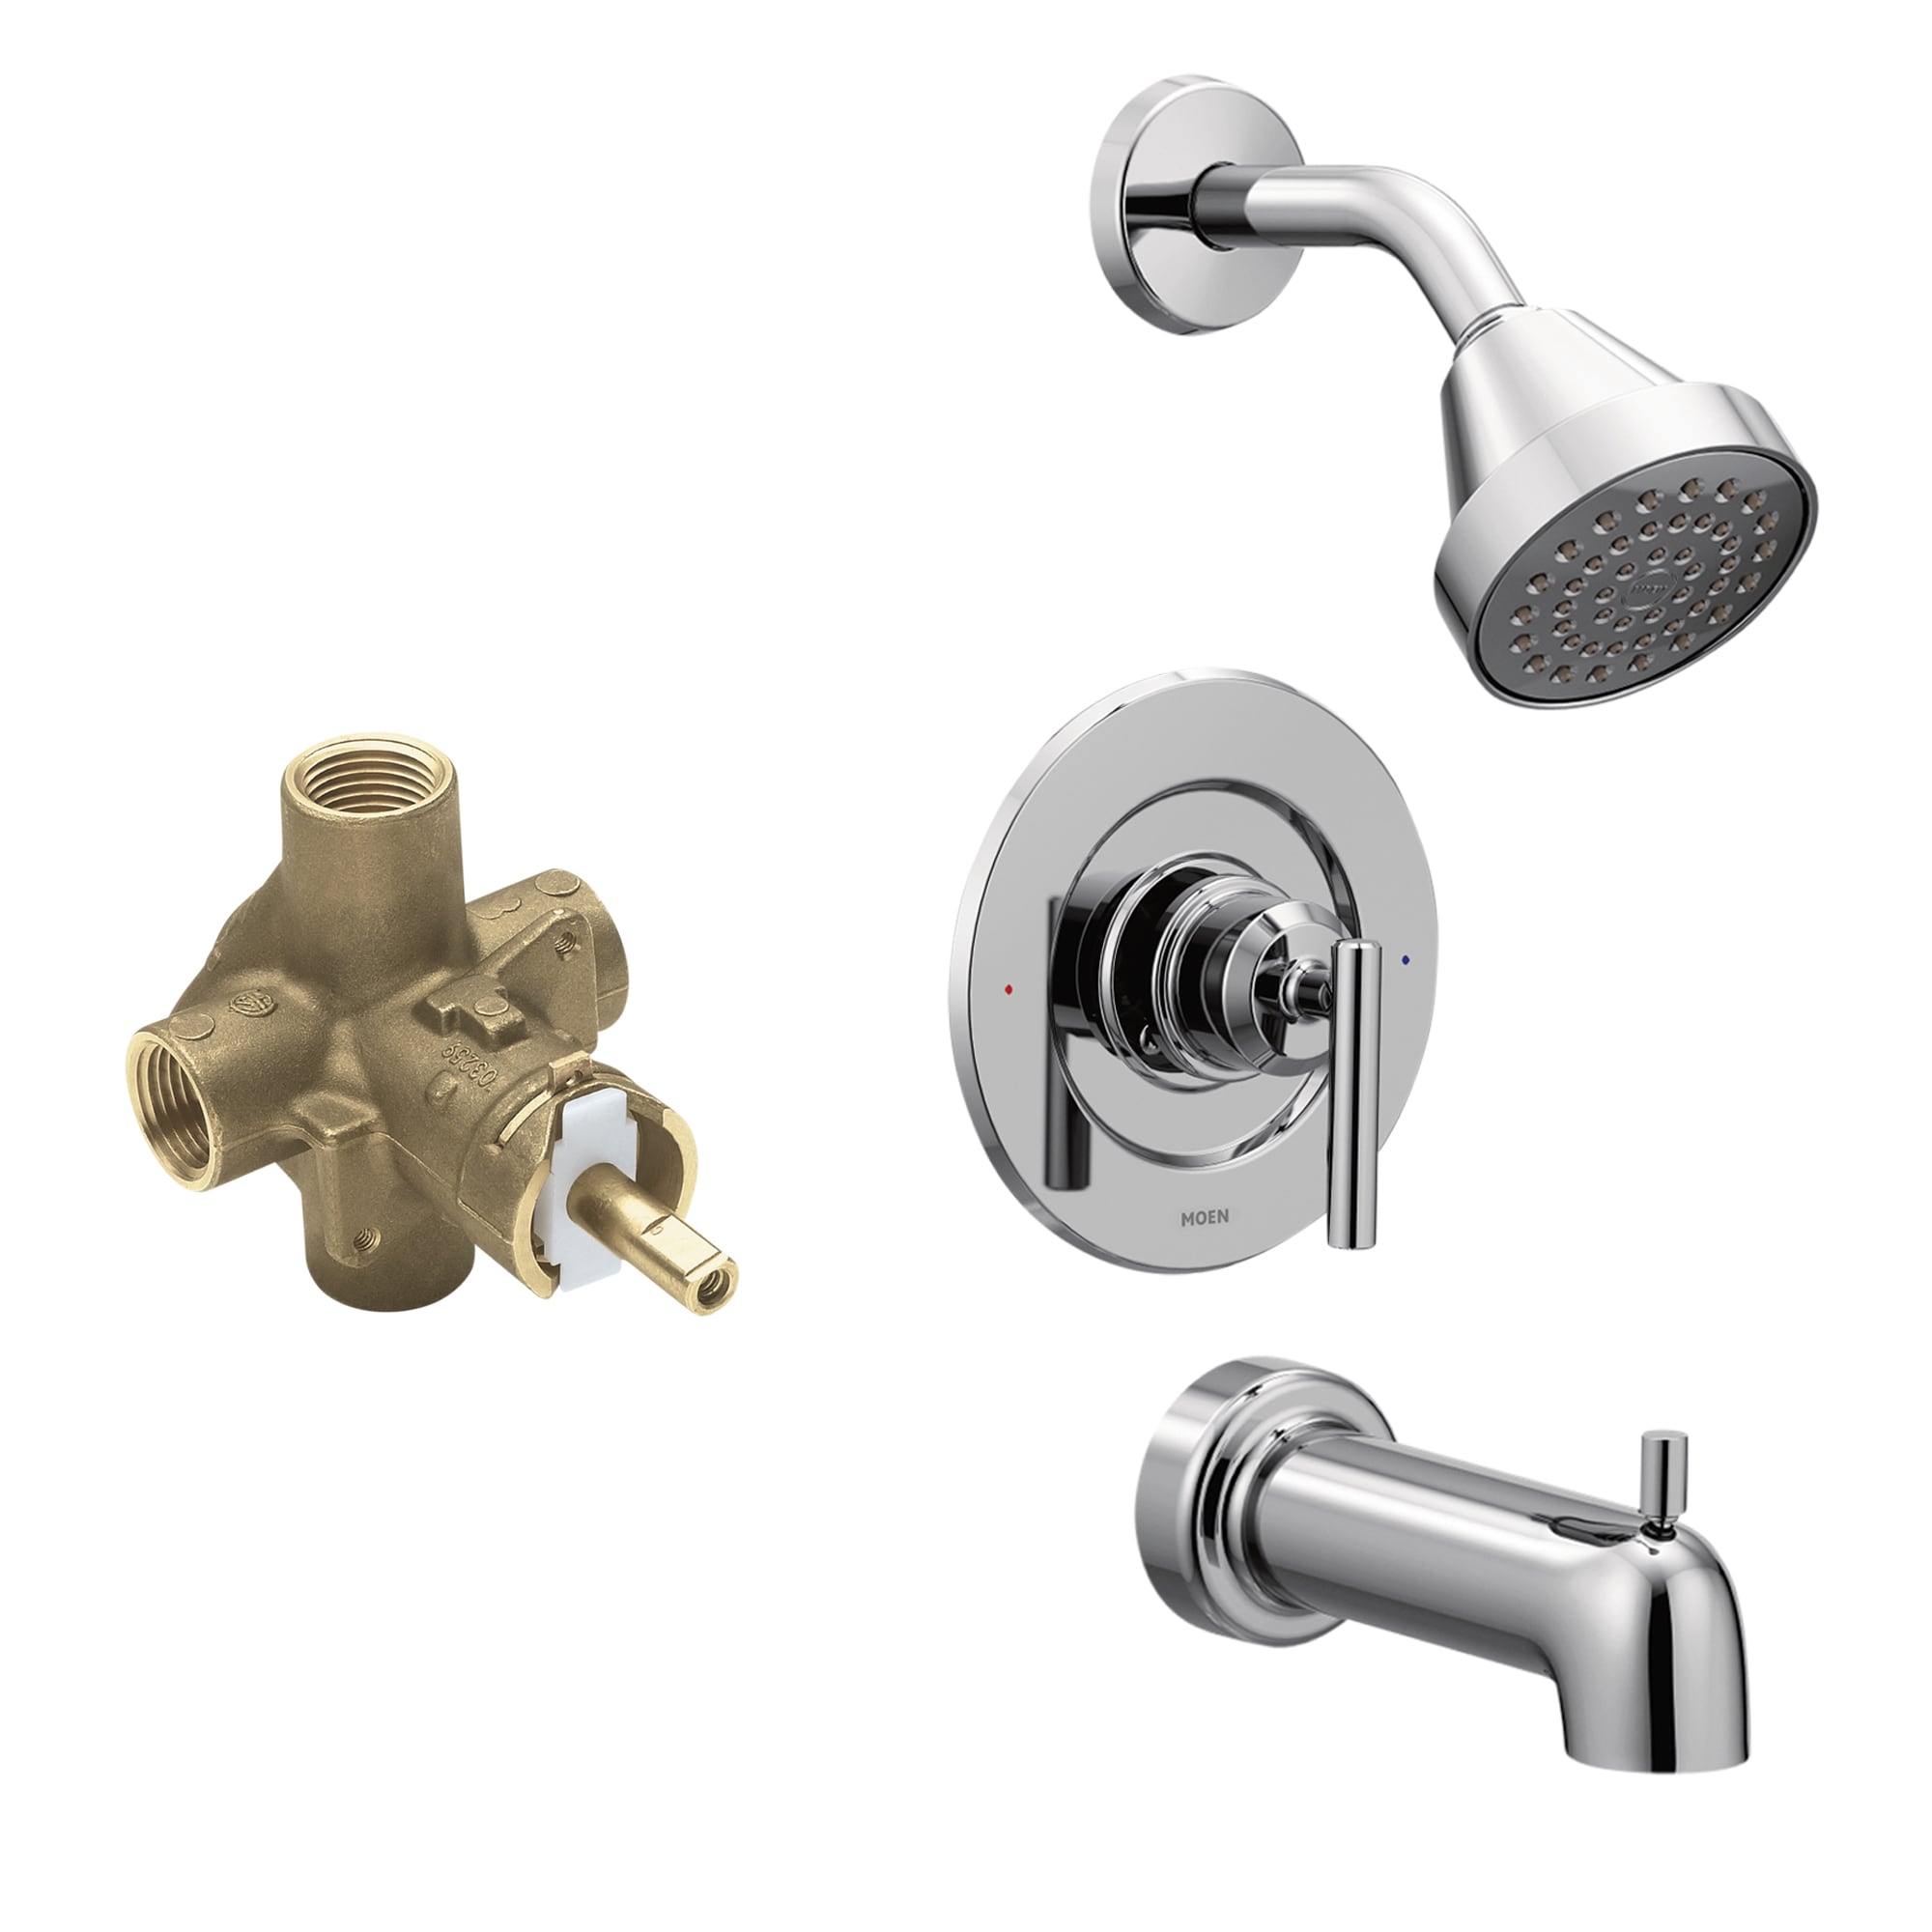 Moen Gibson Single-Handle Posi-Temp Tub and Shower Faucet Trim Kit in Chrome with Valve